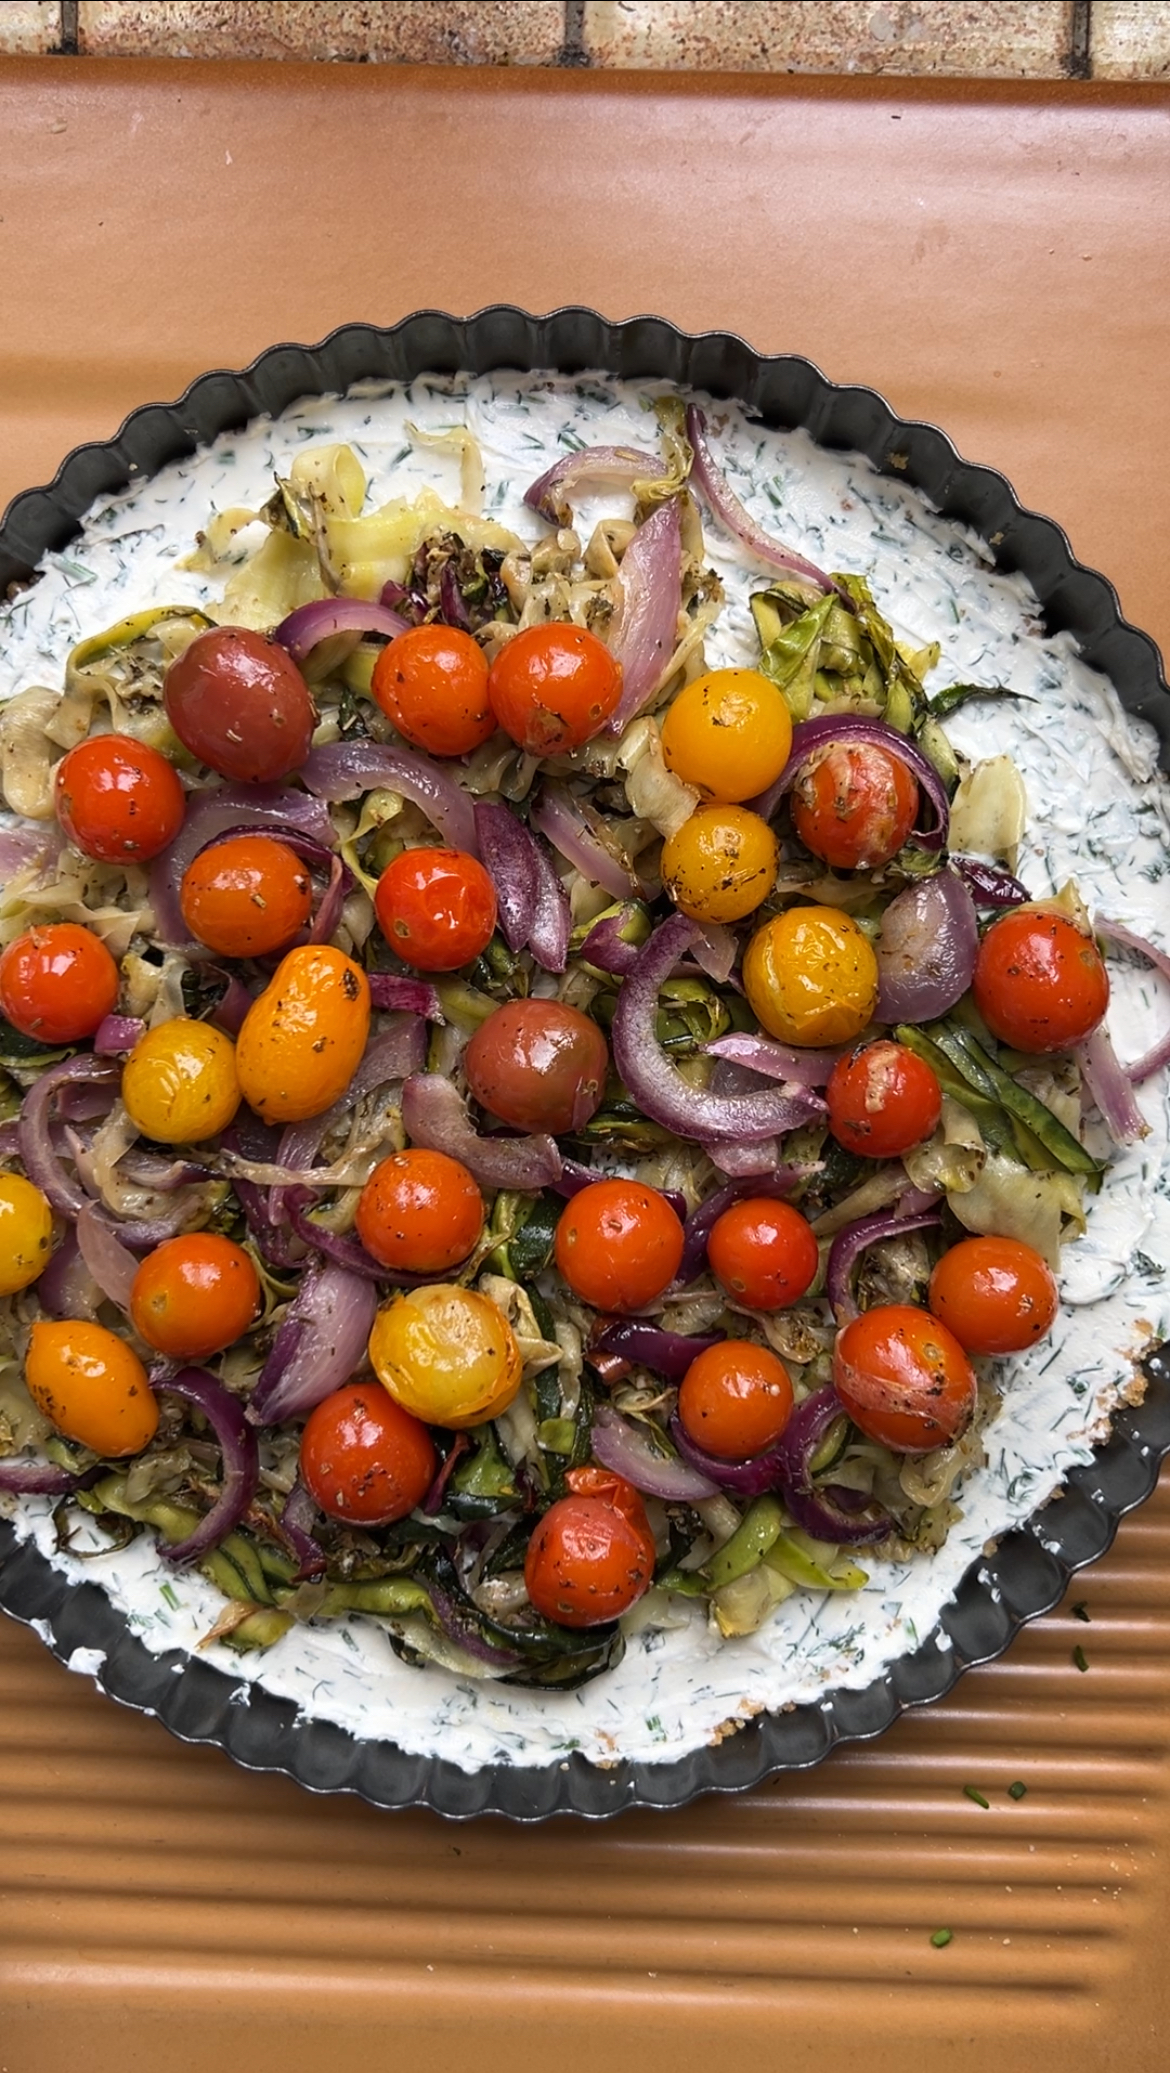 The roasted vegetables are added to the cream cheese mixture in the tart tin.